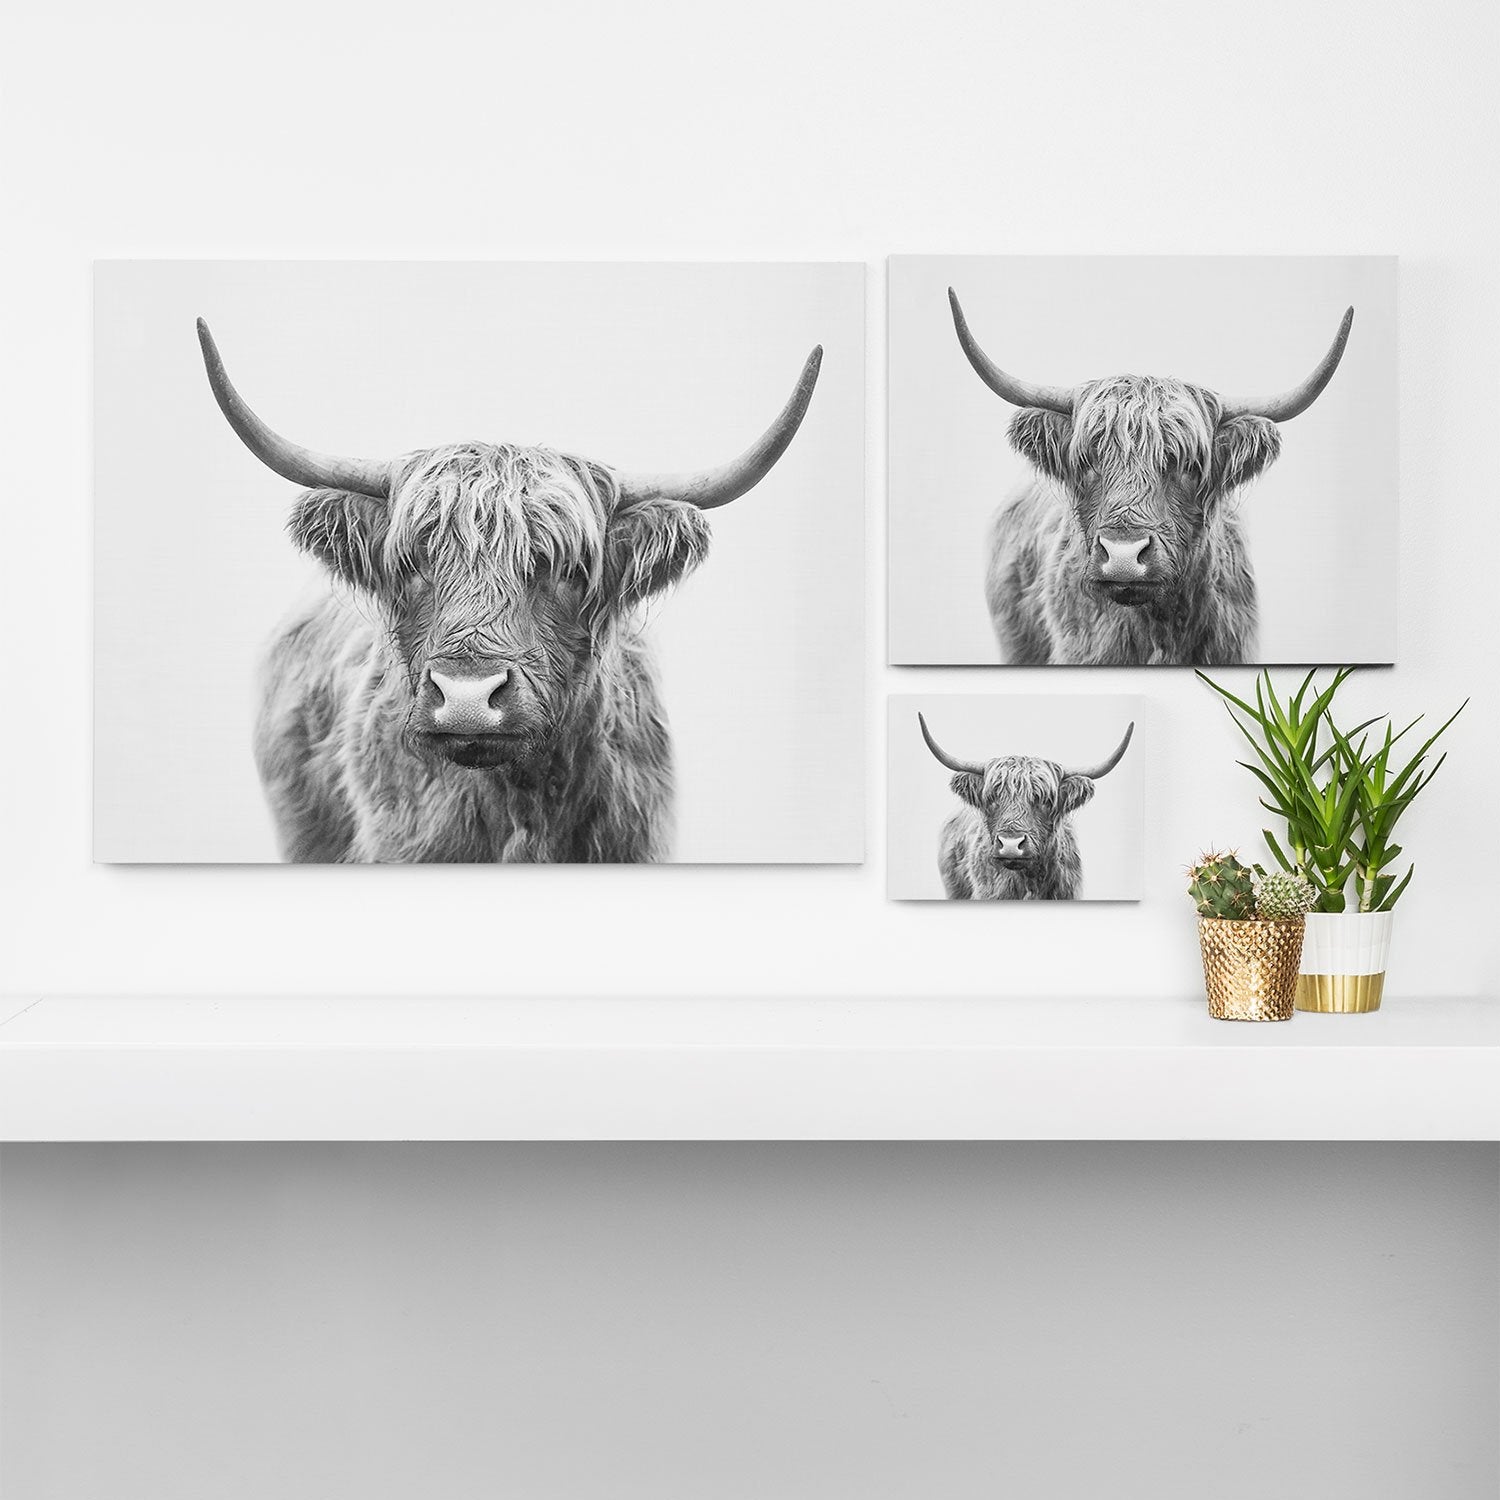 Highland Bull Canvas Print Choice of Size - animal, art, bedding, bedroom, bull, canvas, cattle, cow, farm, hairy, high land cow, highland, highland cow, highland cows, highlandbull, highlandcattle, highlandcow, highlandcows, highlander, highlanders, highlands, picture, pictures, southwestern, western -  - Baha Ranch Western Wear